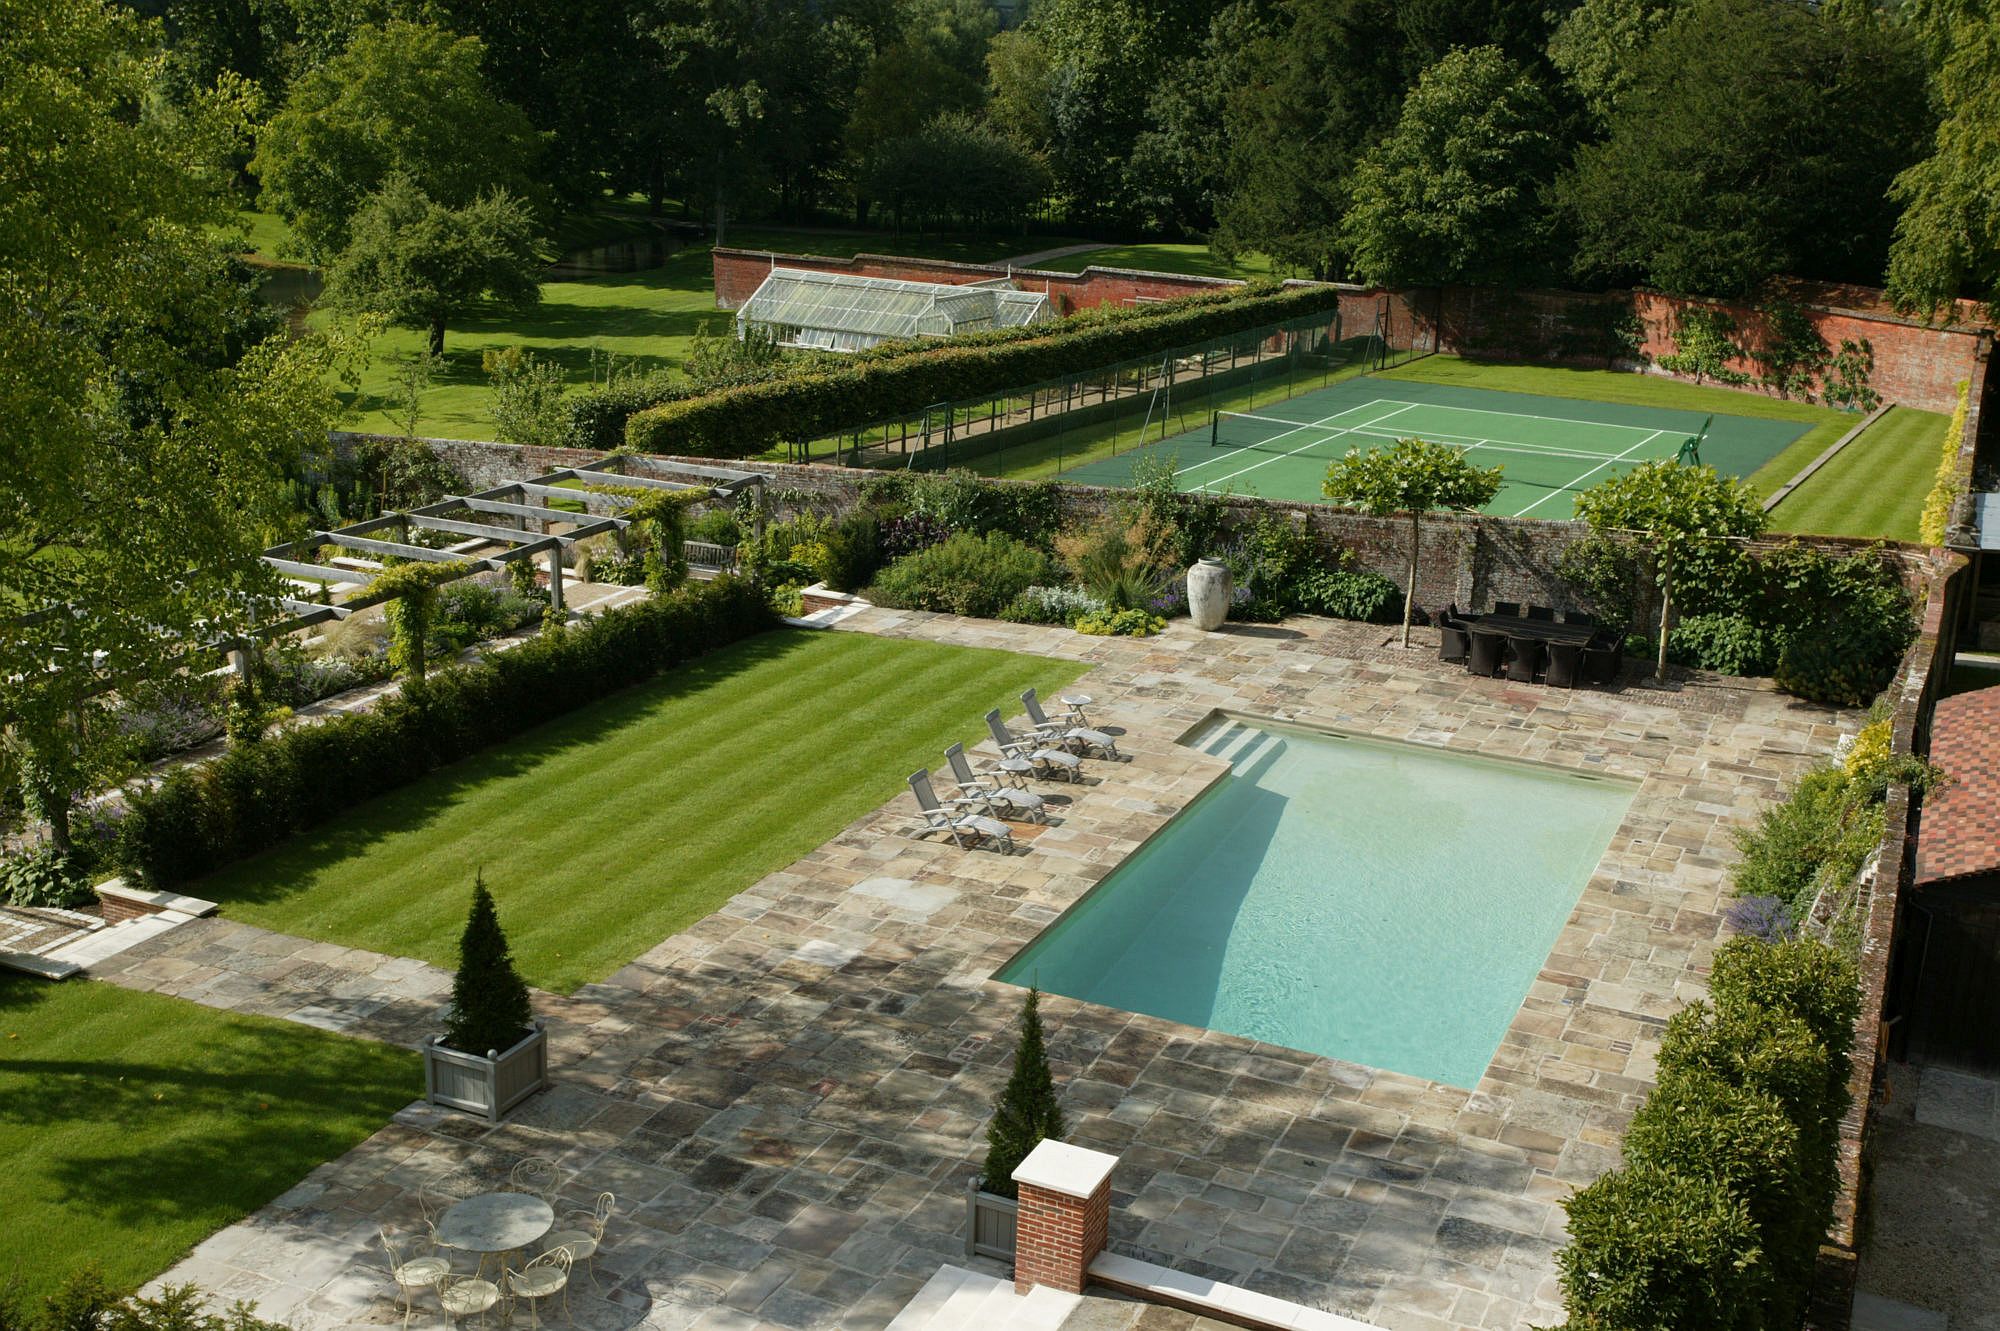 Tennis-court-and-swimming-pool-are-a-part-of-the-expansive-gardens-around-the-Manor-House